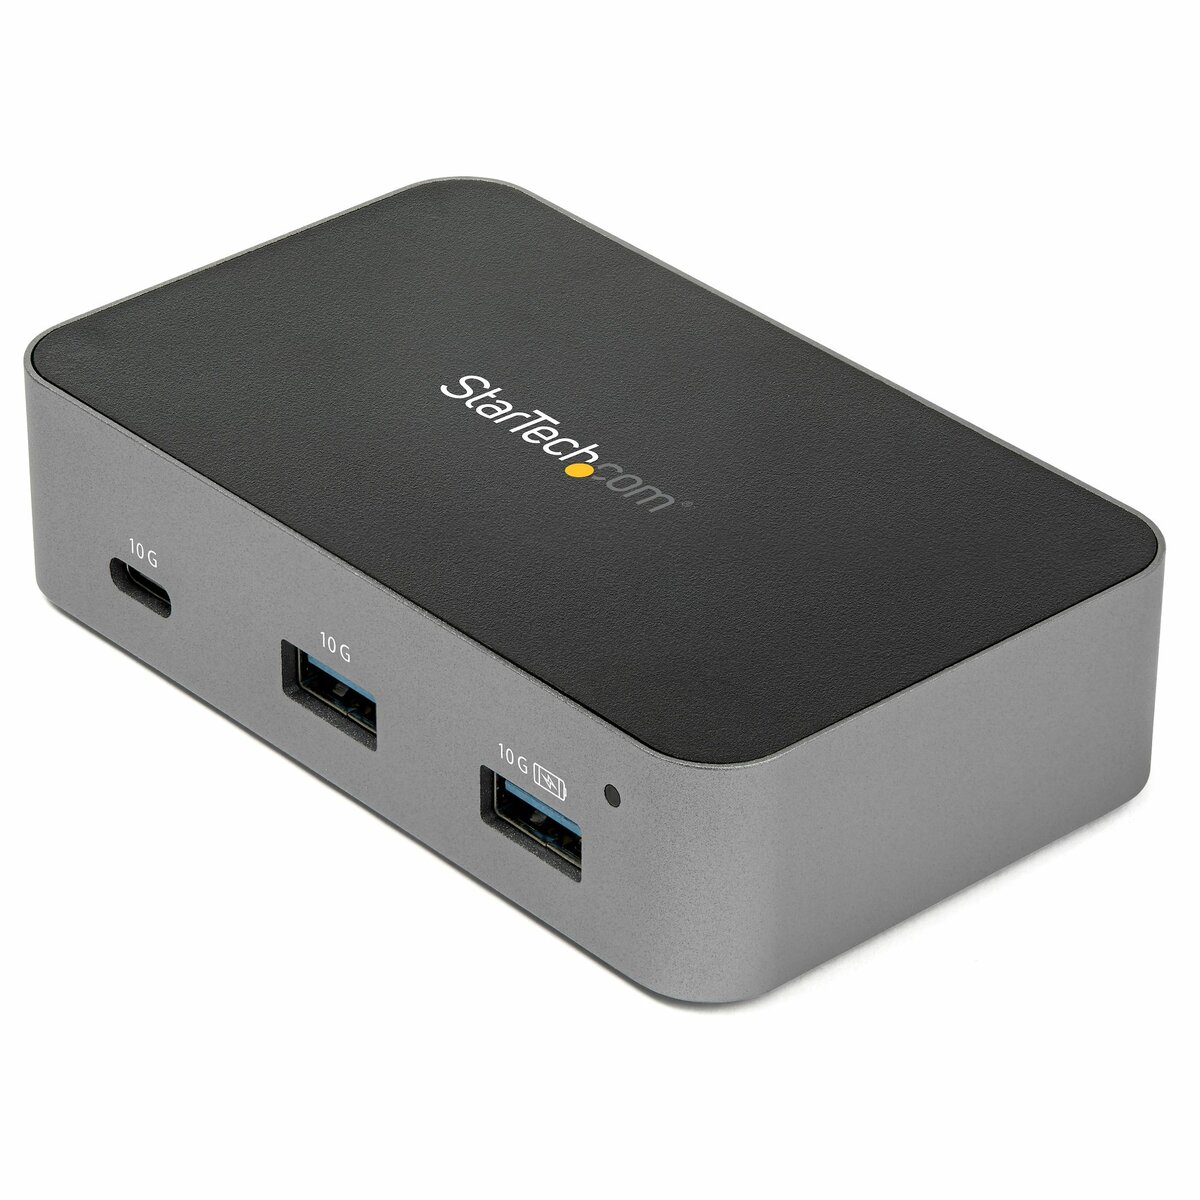 StarTech.com 3 Port USB C 3.1 Gen 2 Hub with Adapter, 10Gbps USB Type C to & USB-C Ports, USB Hub w/ BC 1.2 Phone Fast Charging, Superspeed